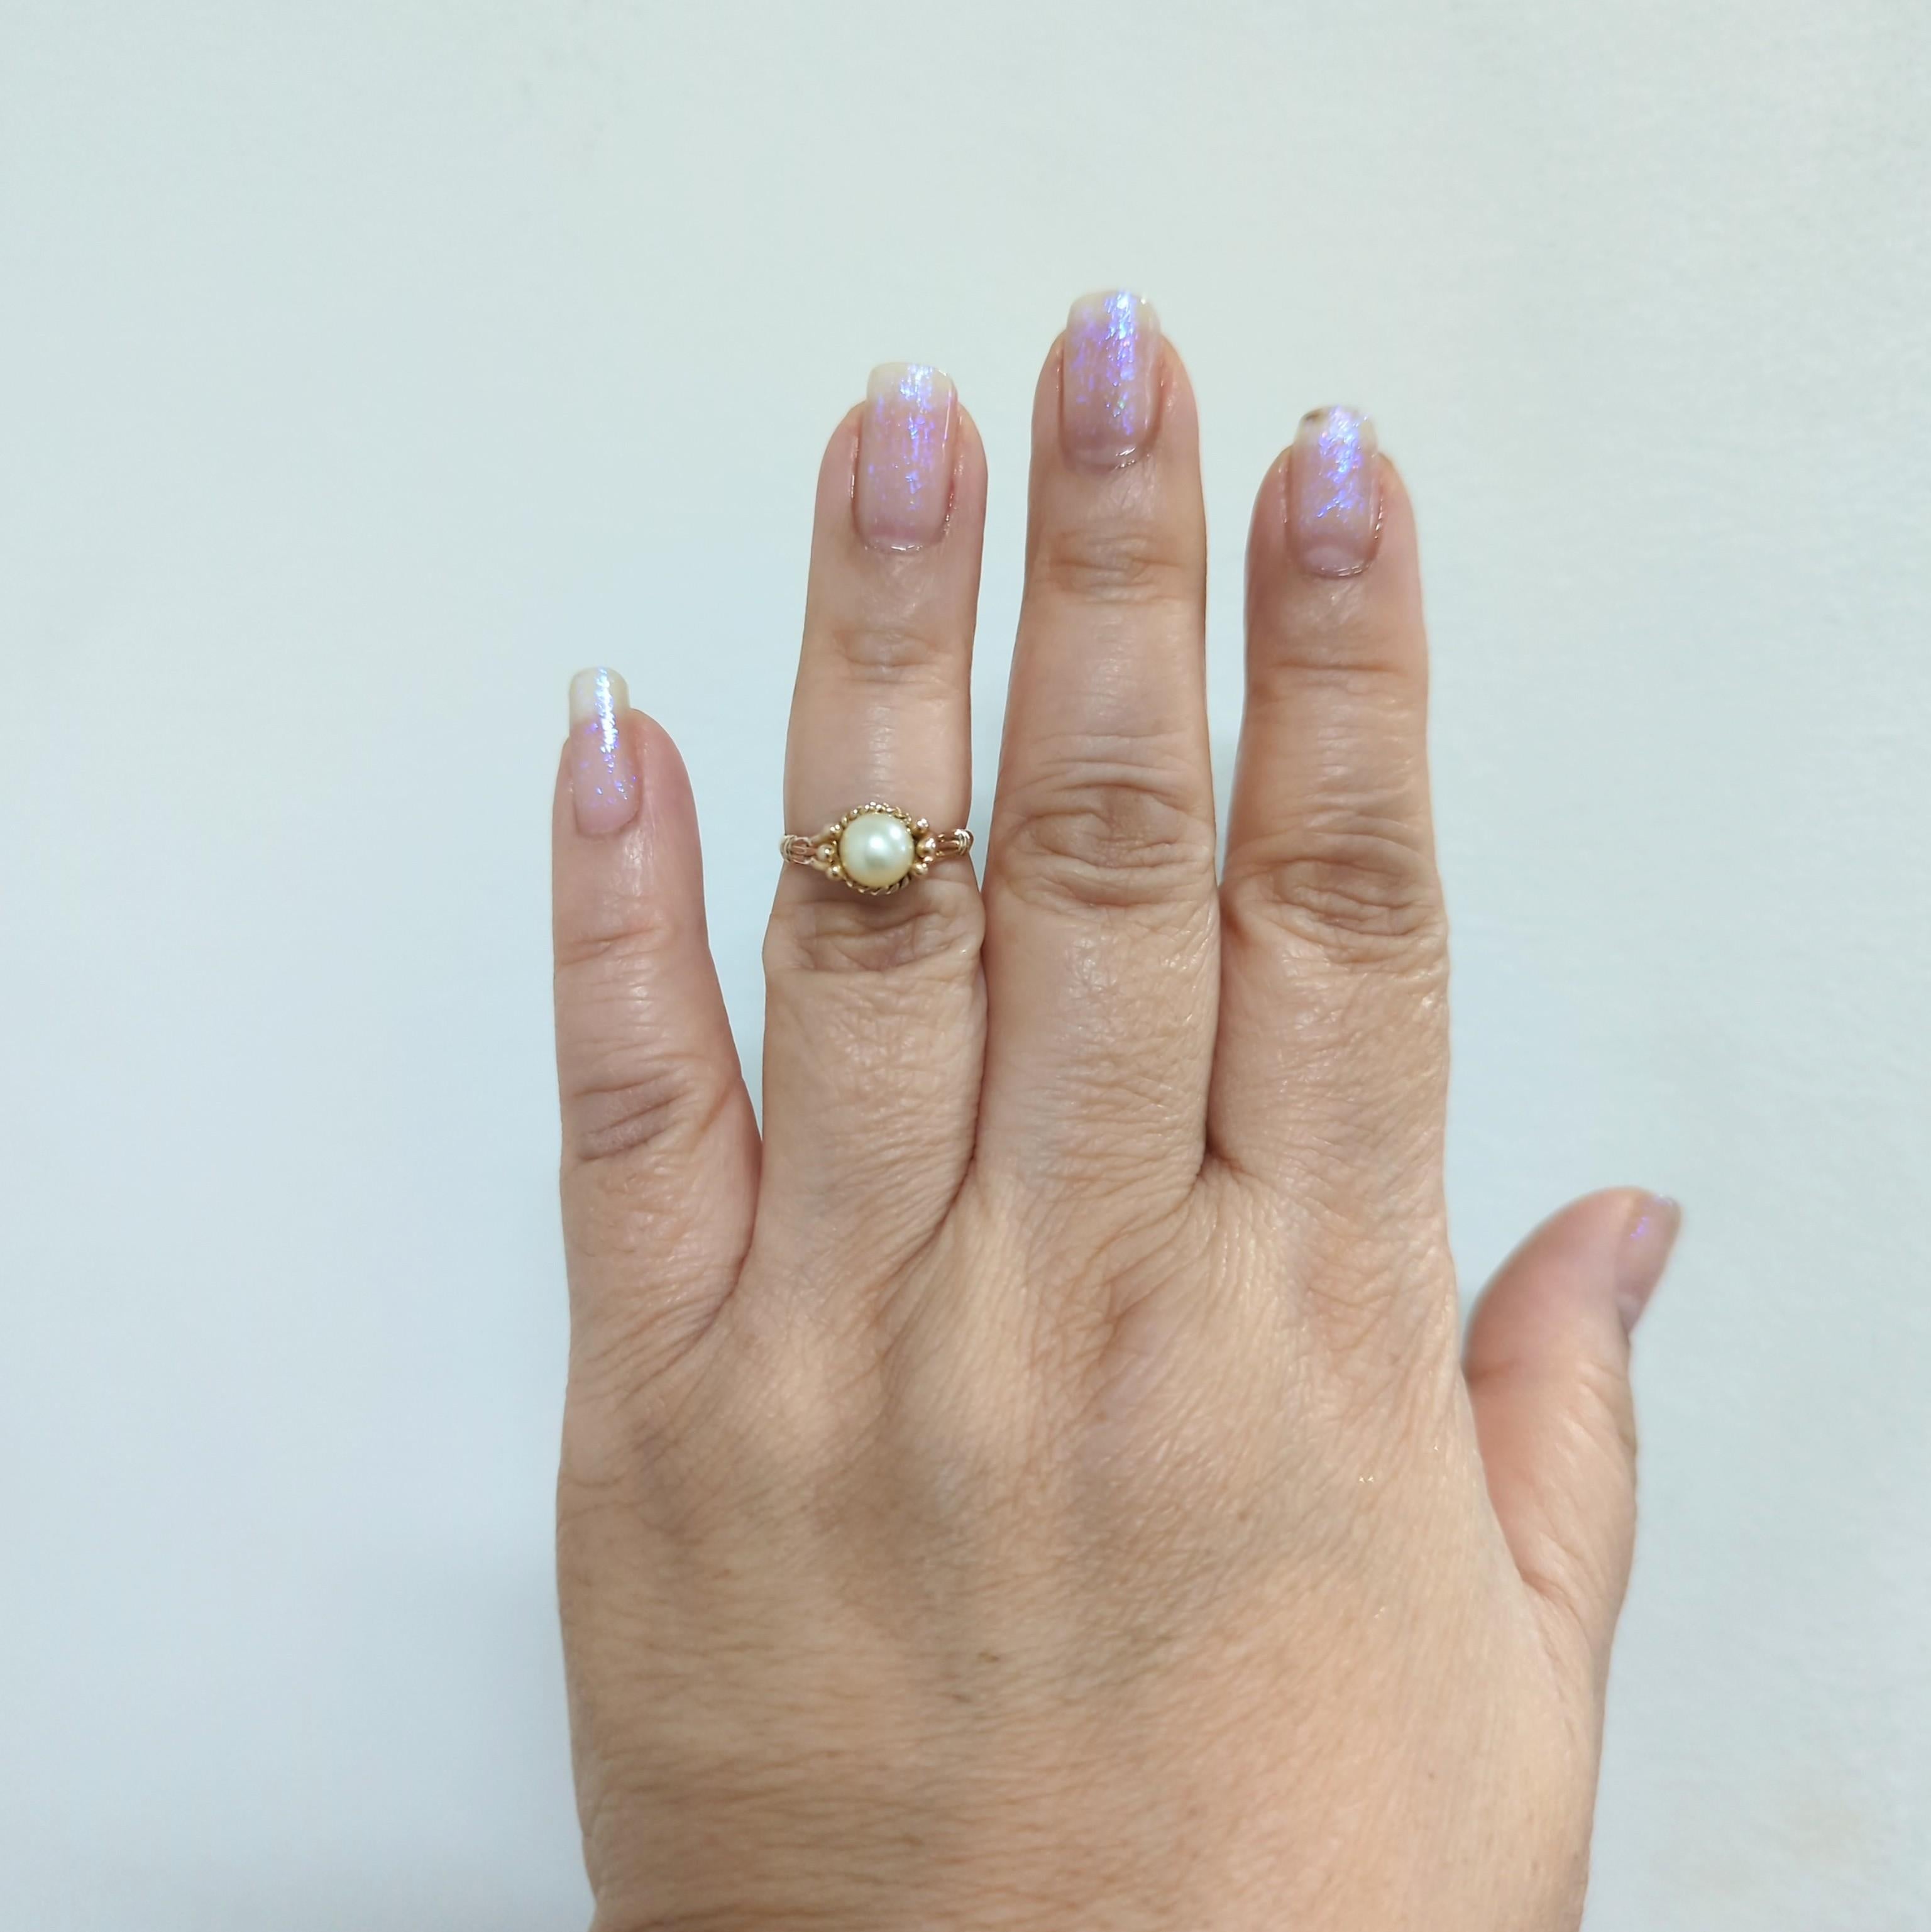 Beautiful white round Akoya pearl in a handmade 14k yellow gold mounting.  Ring size 6.